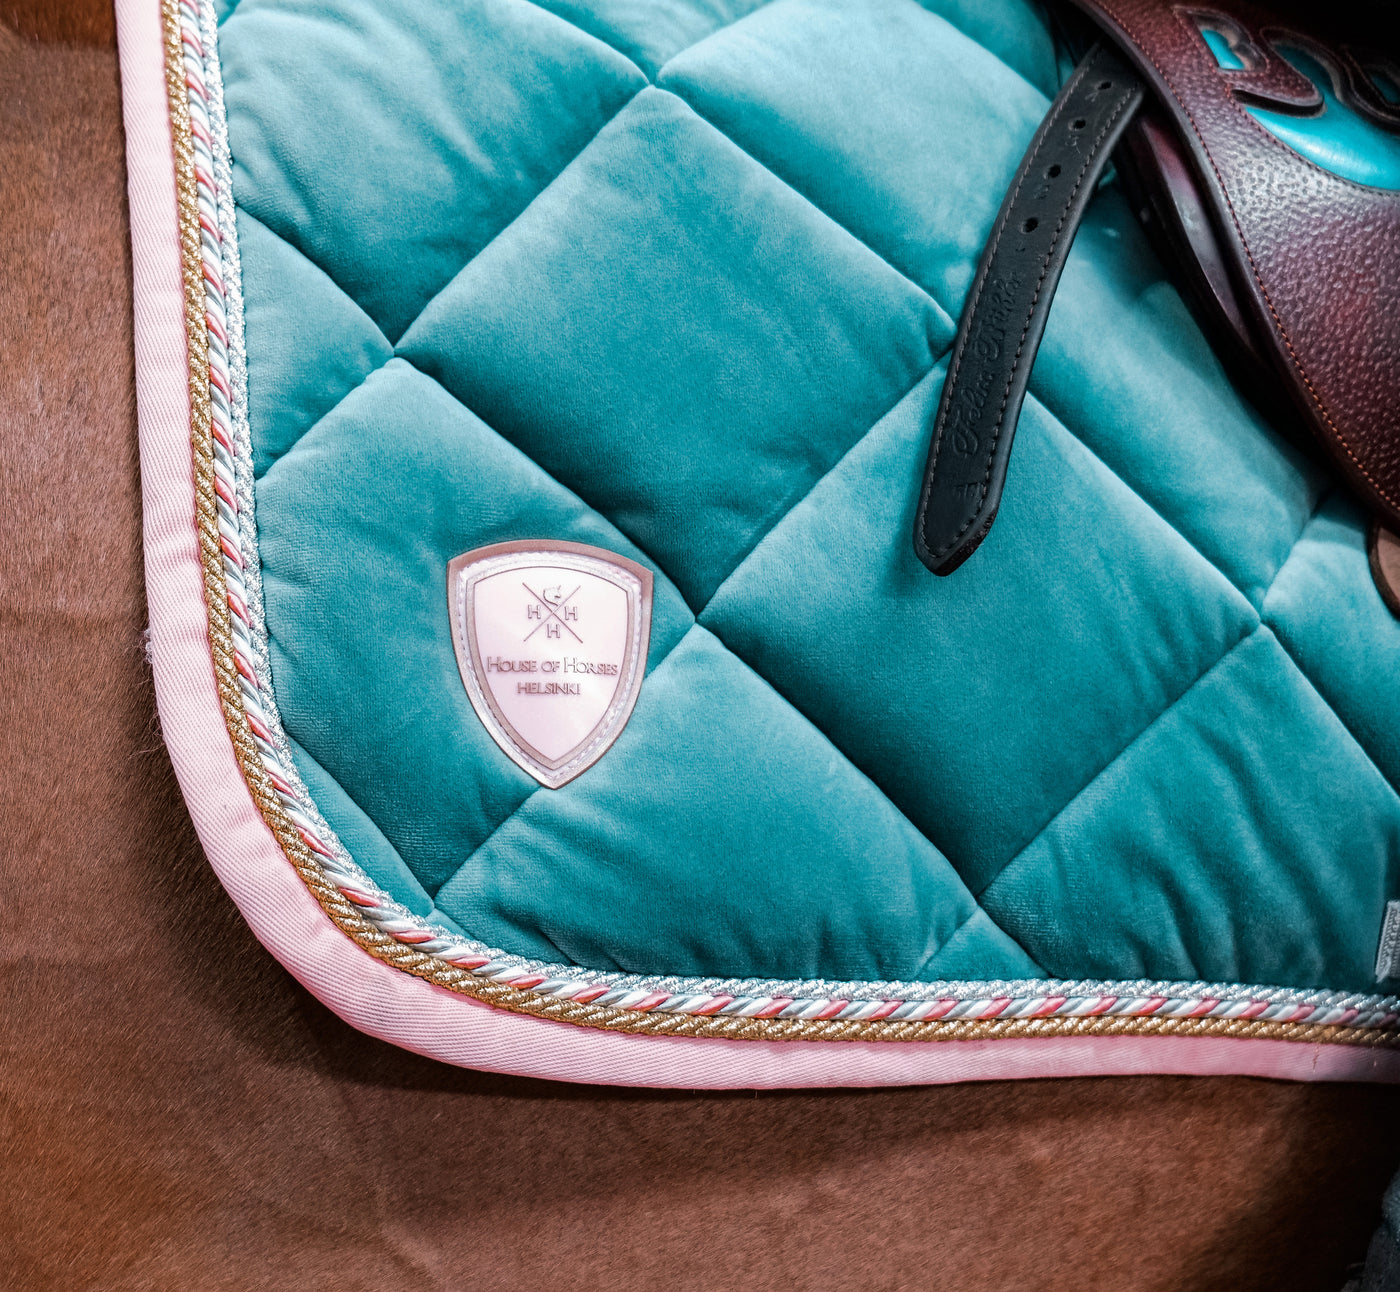 Equestrian Dreams Are Made of Velvet Saddle Pads